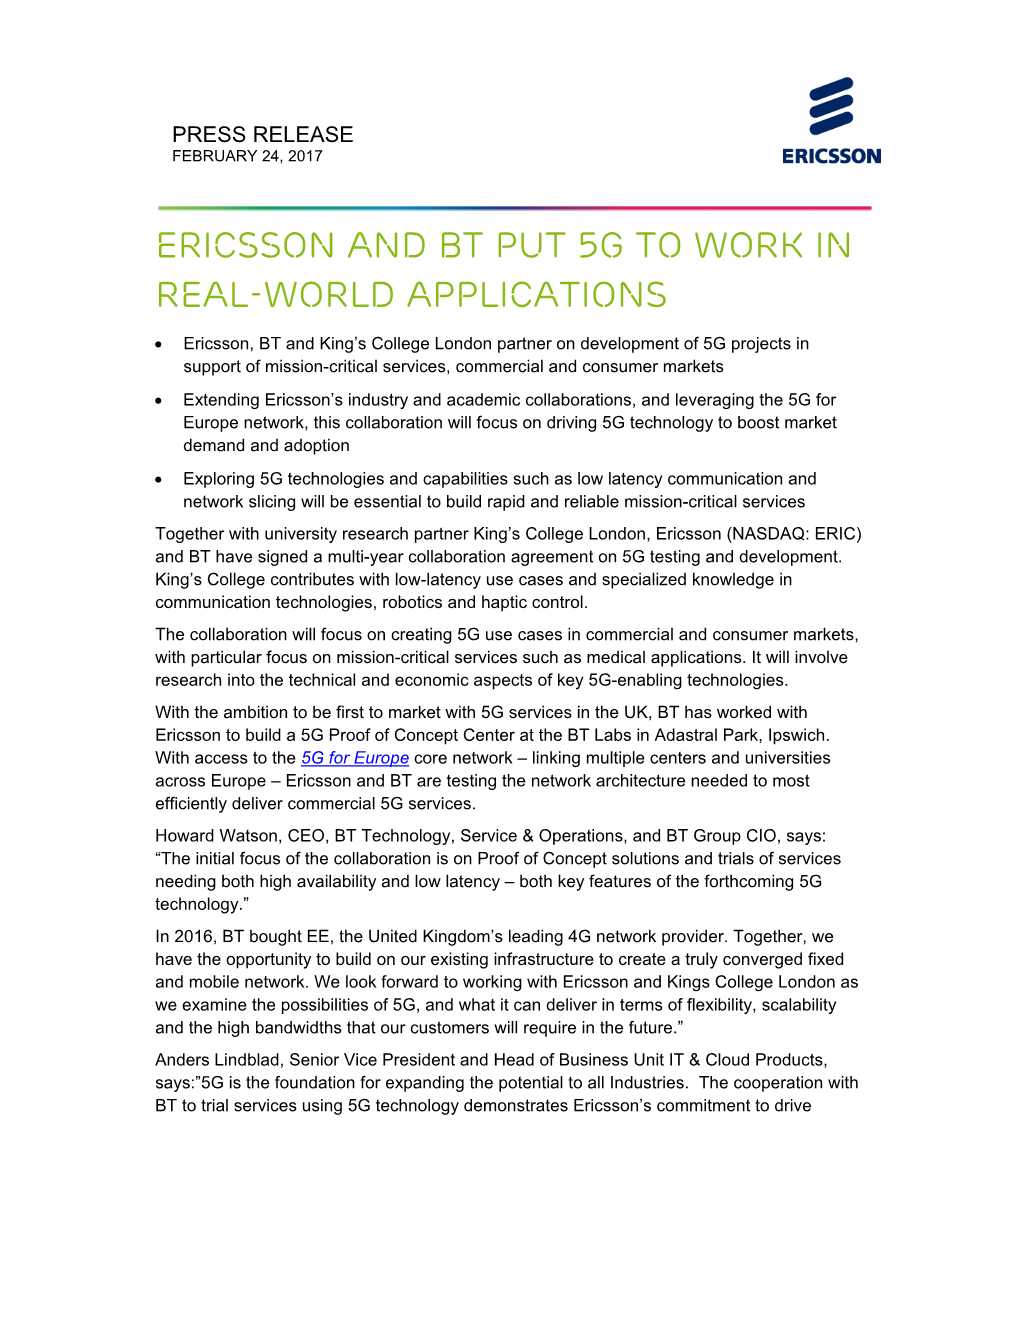 Ericsson and BT Put 5G to Work in Real-World Applications